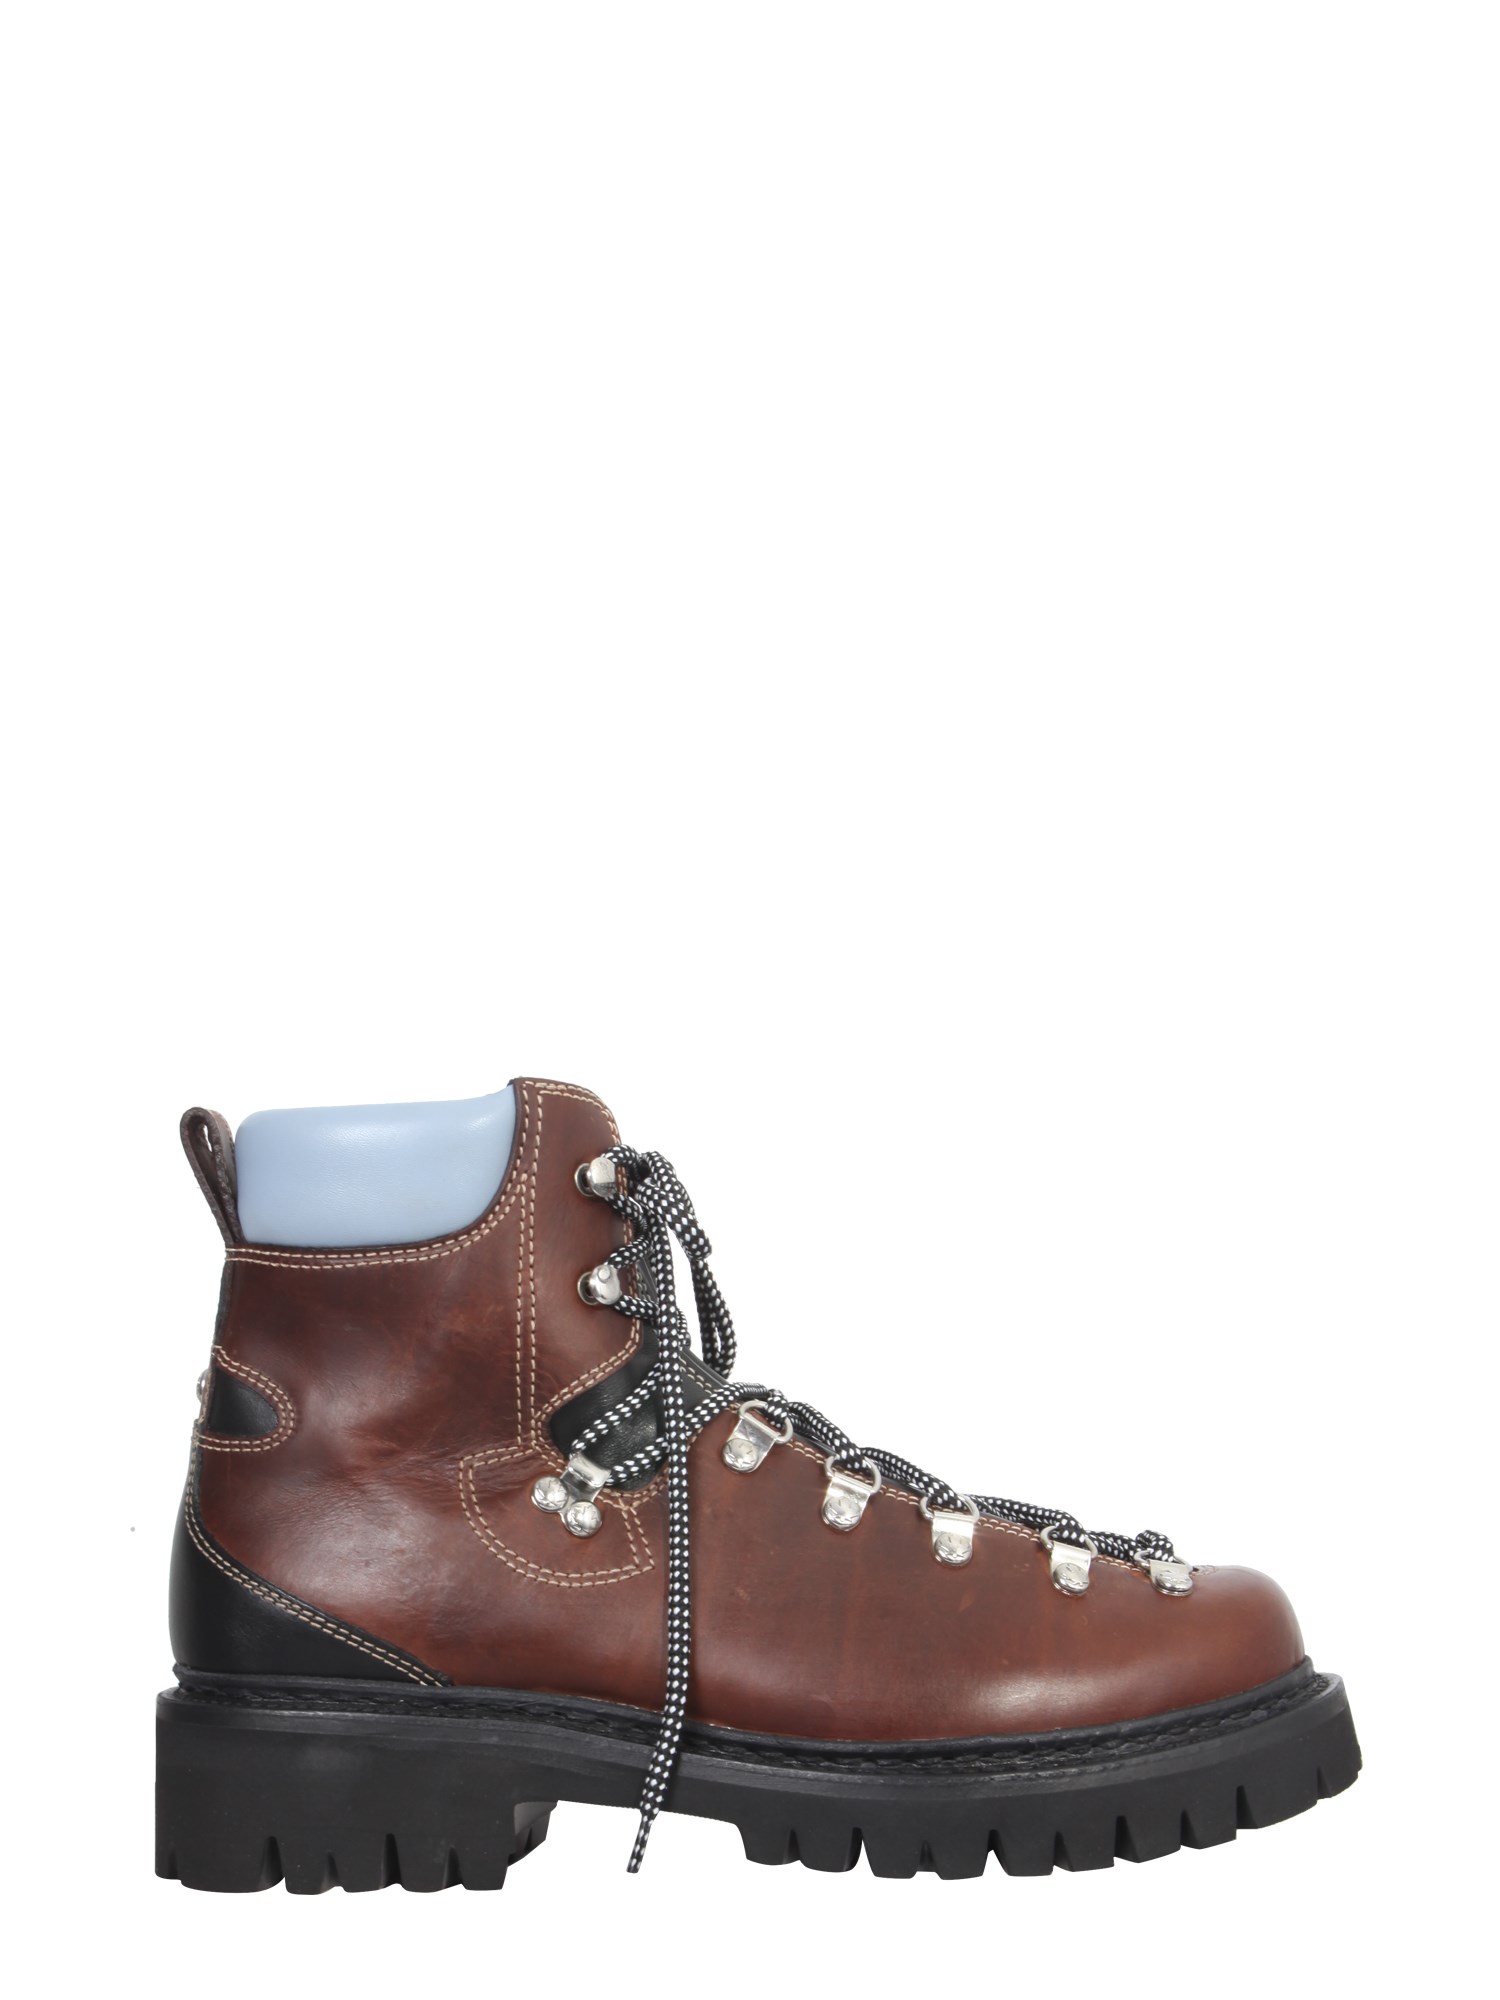 dsquared new hiking boots